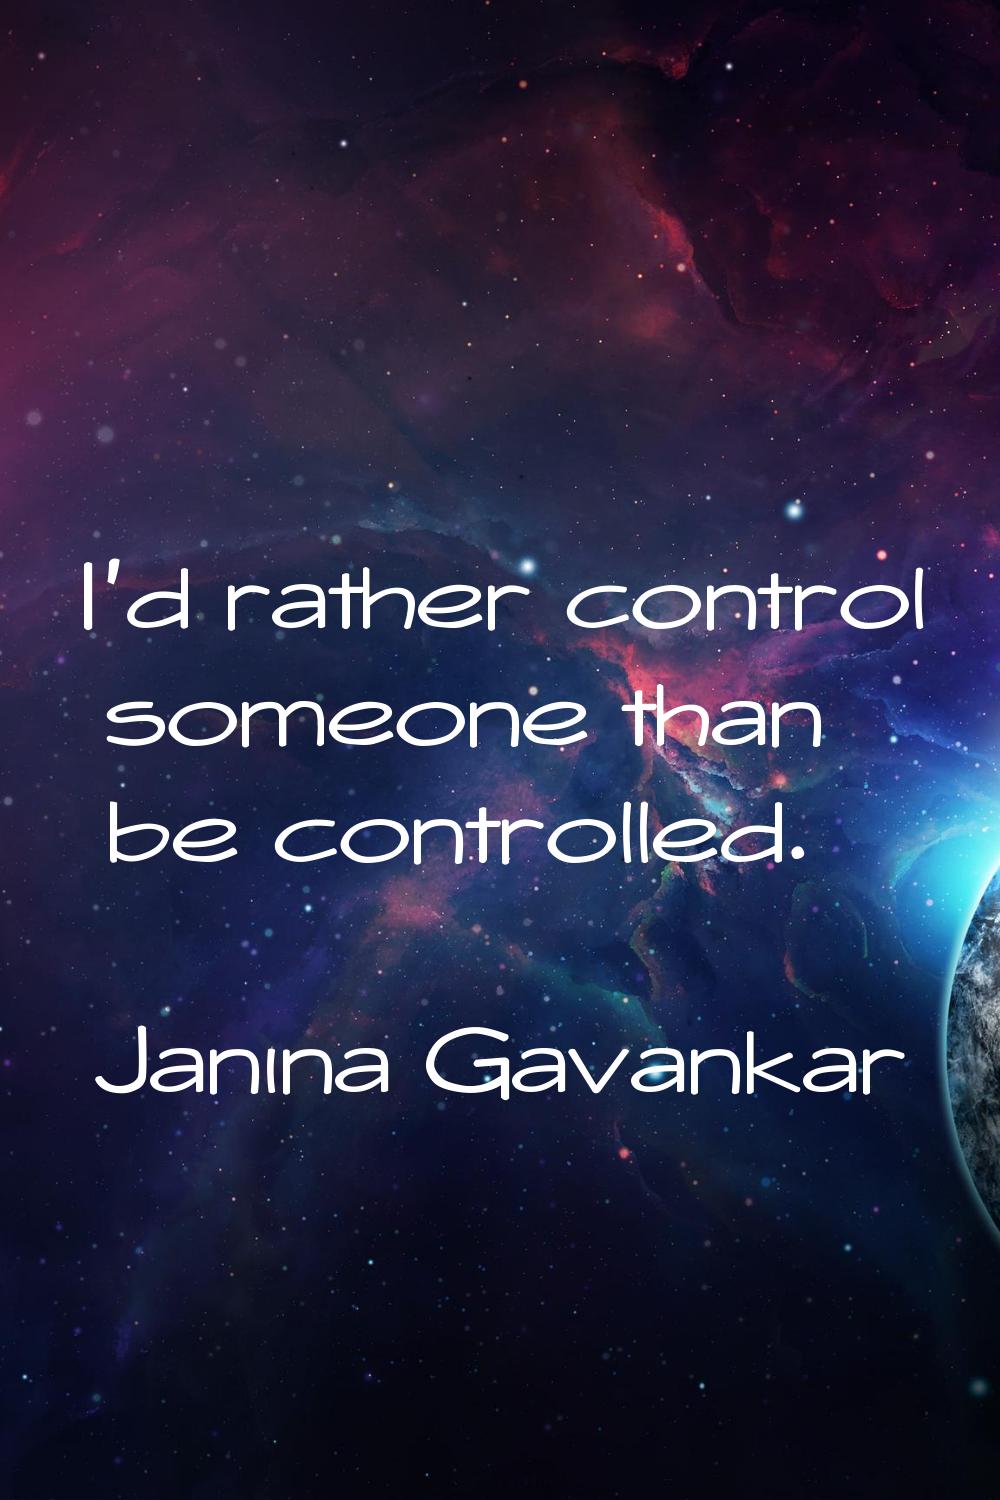 I'd rather control someone than be controlled.